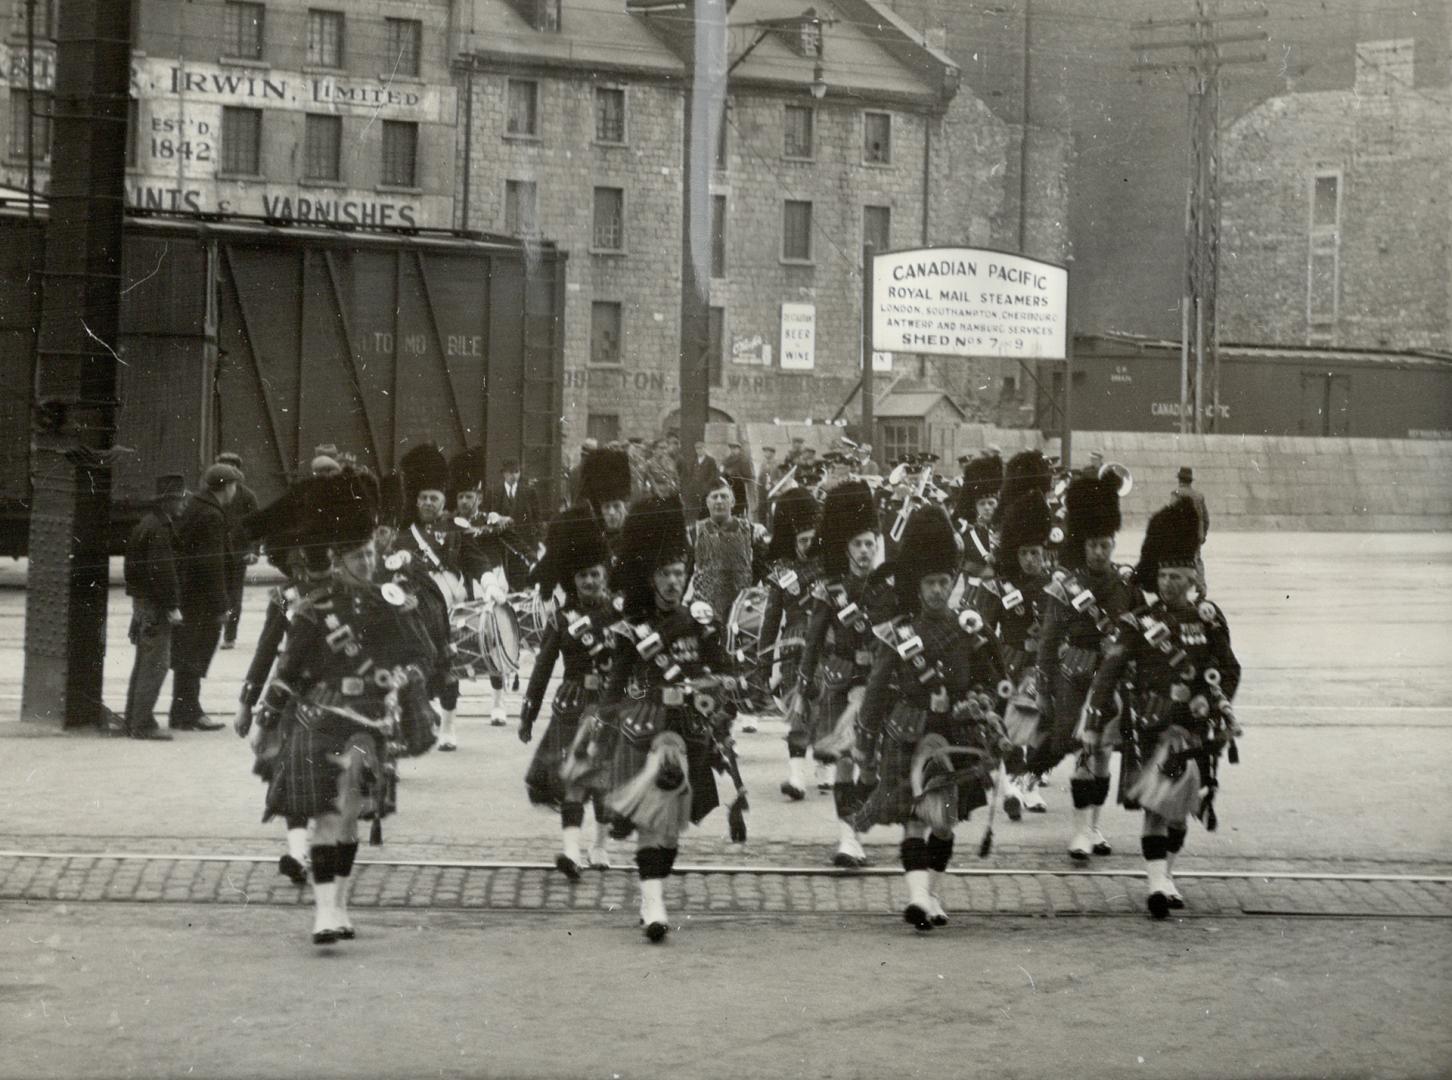 Coronation bound, Marching smarly to shed number 9 in Montreal, where they embarked aboard the Canadian Pacific Liner Montcalm for England, Canada's C(...)